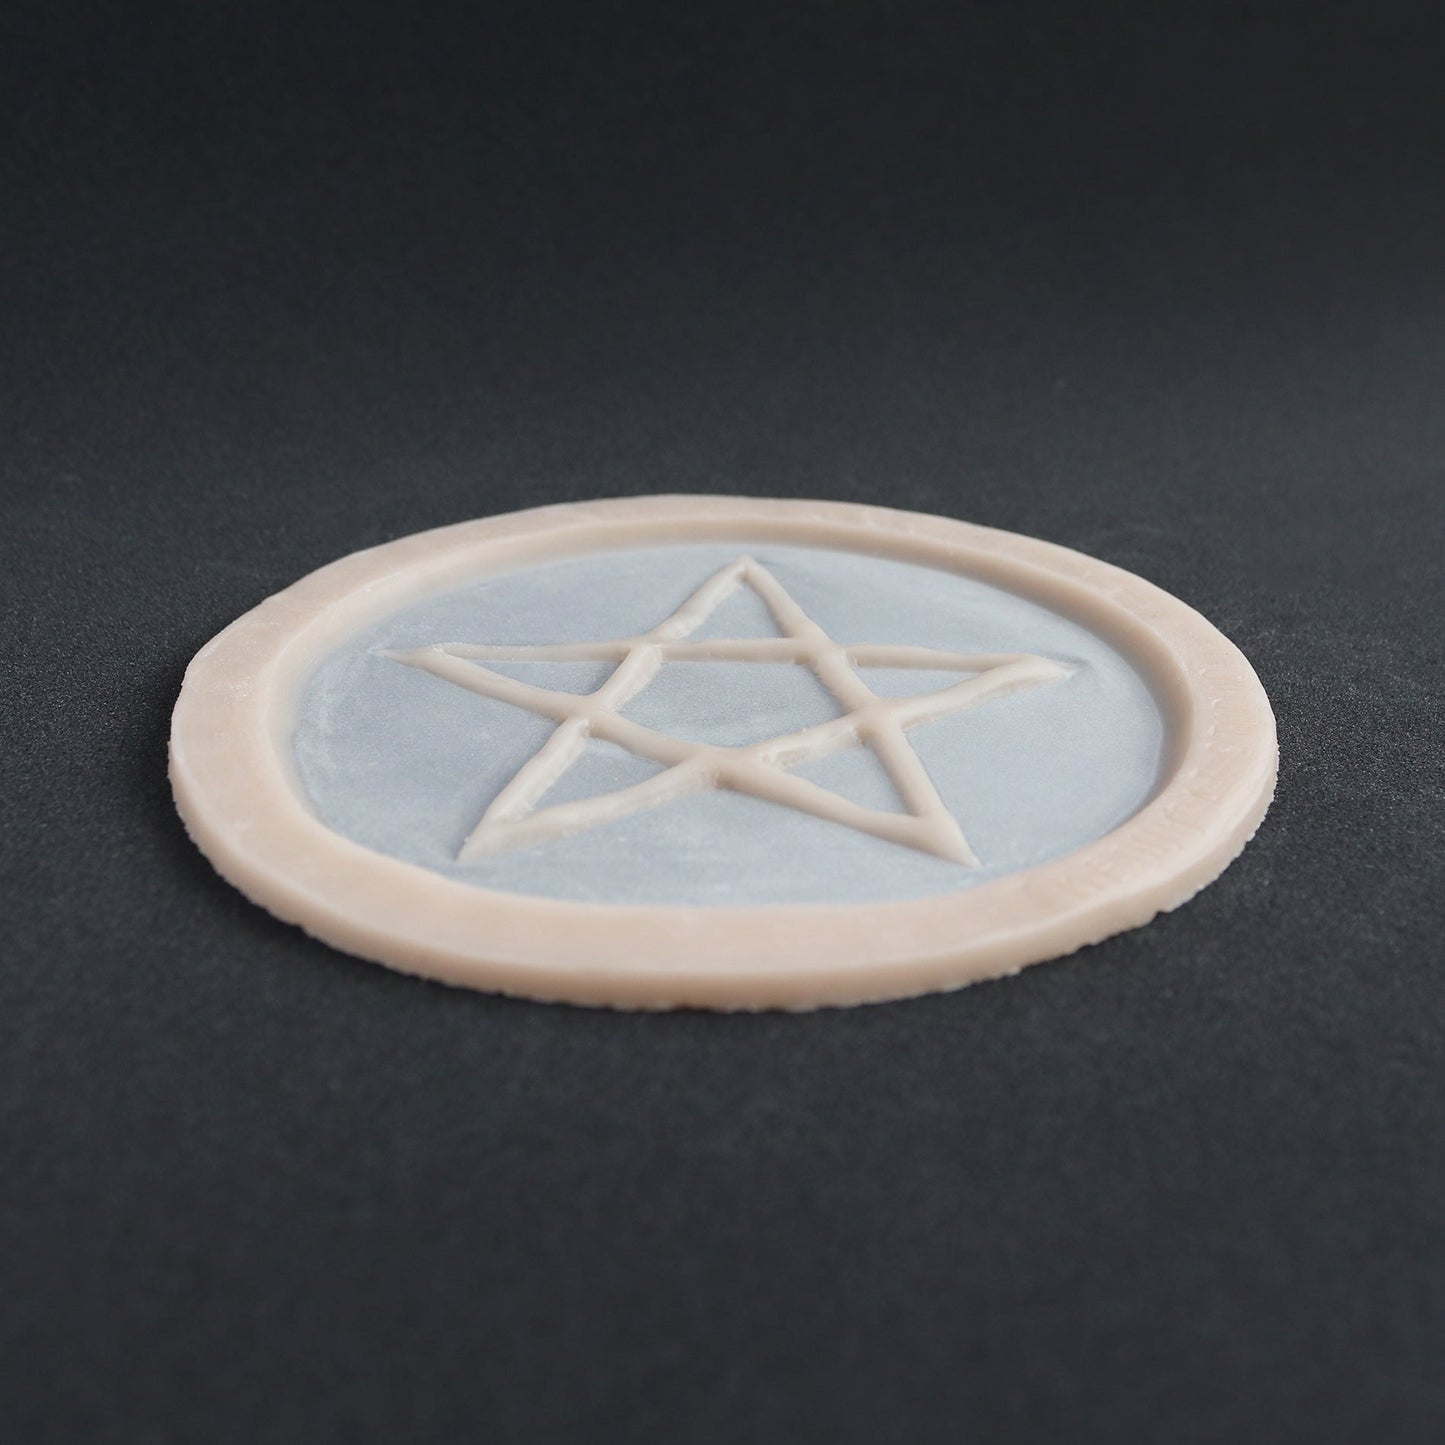 Pentagram Scarification - Silicone makeup prosthetic in vanilla shade on a black surface